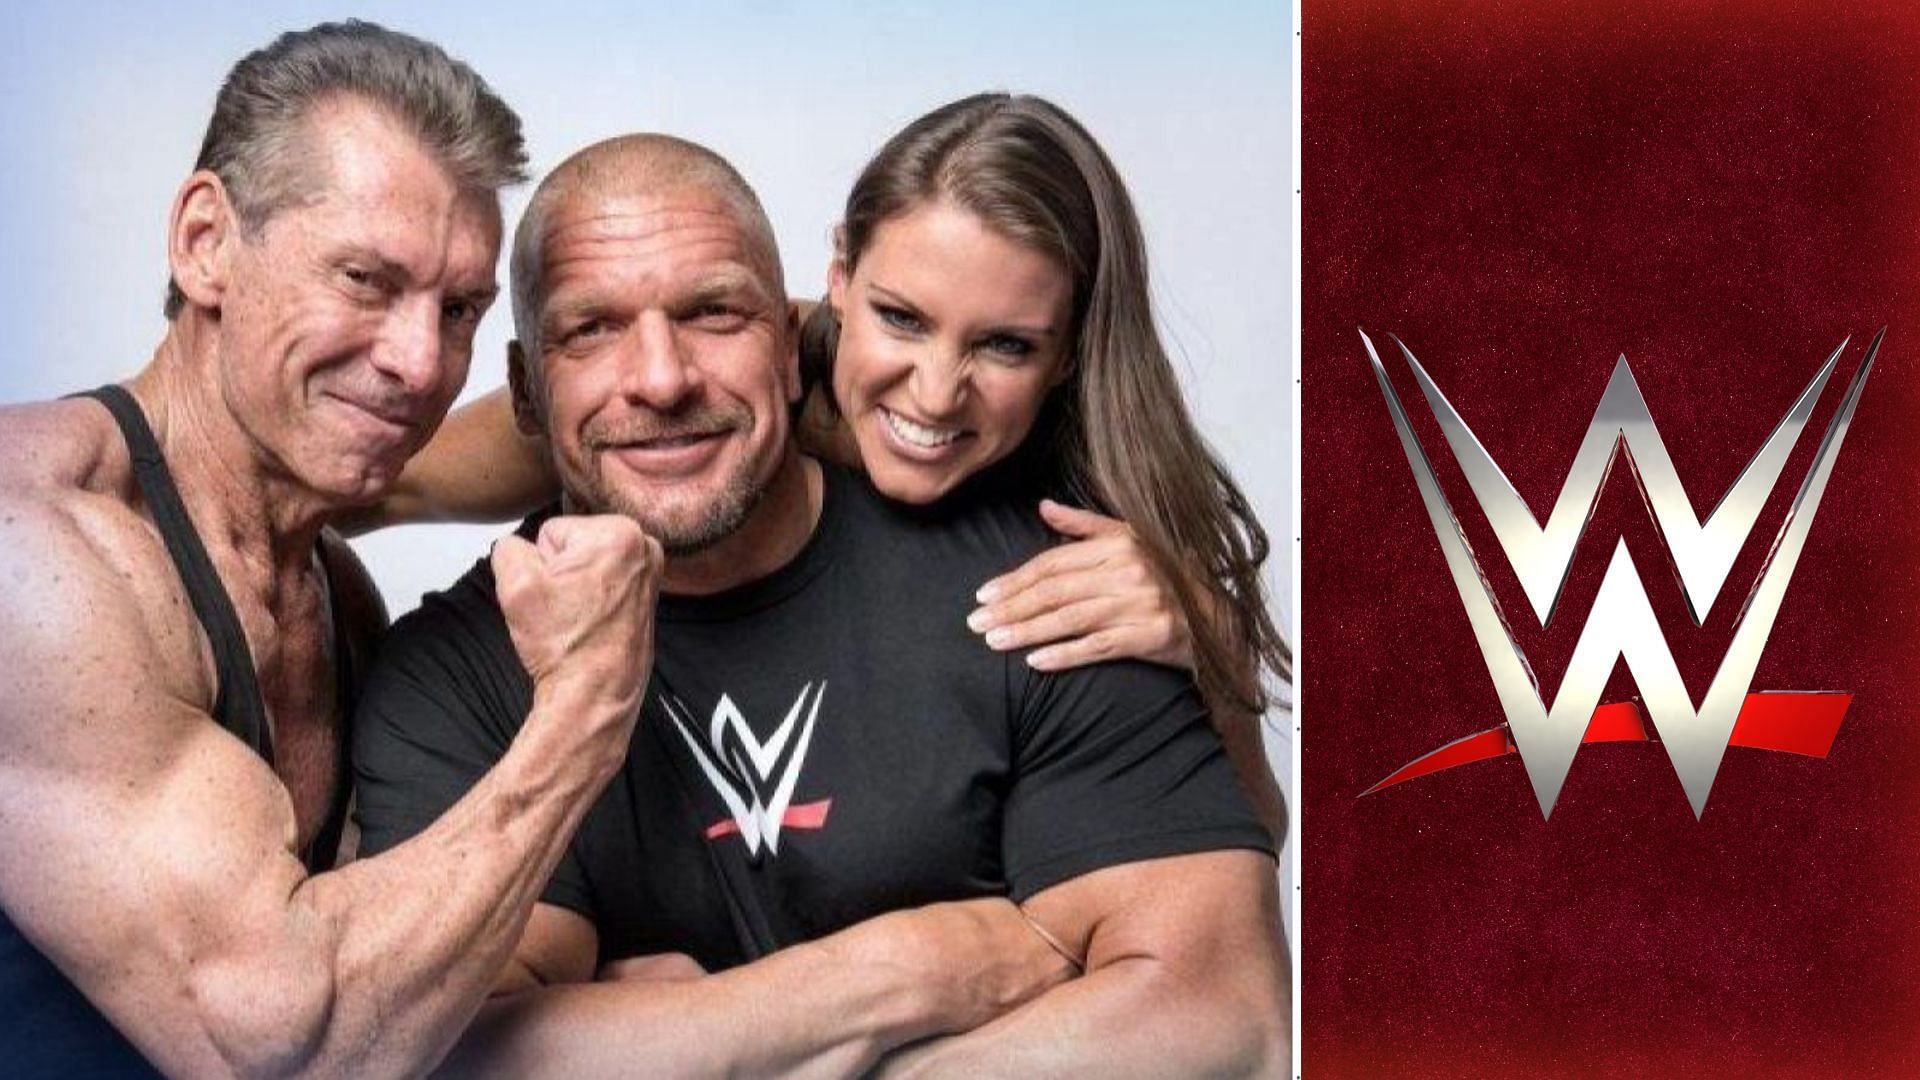 Vince McMahon recently retired from WWE